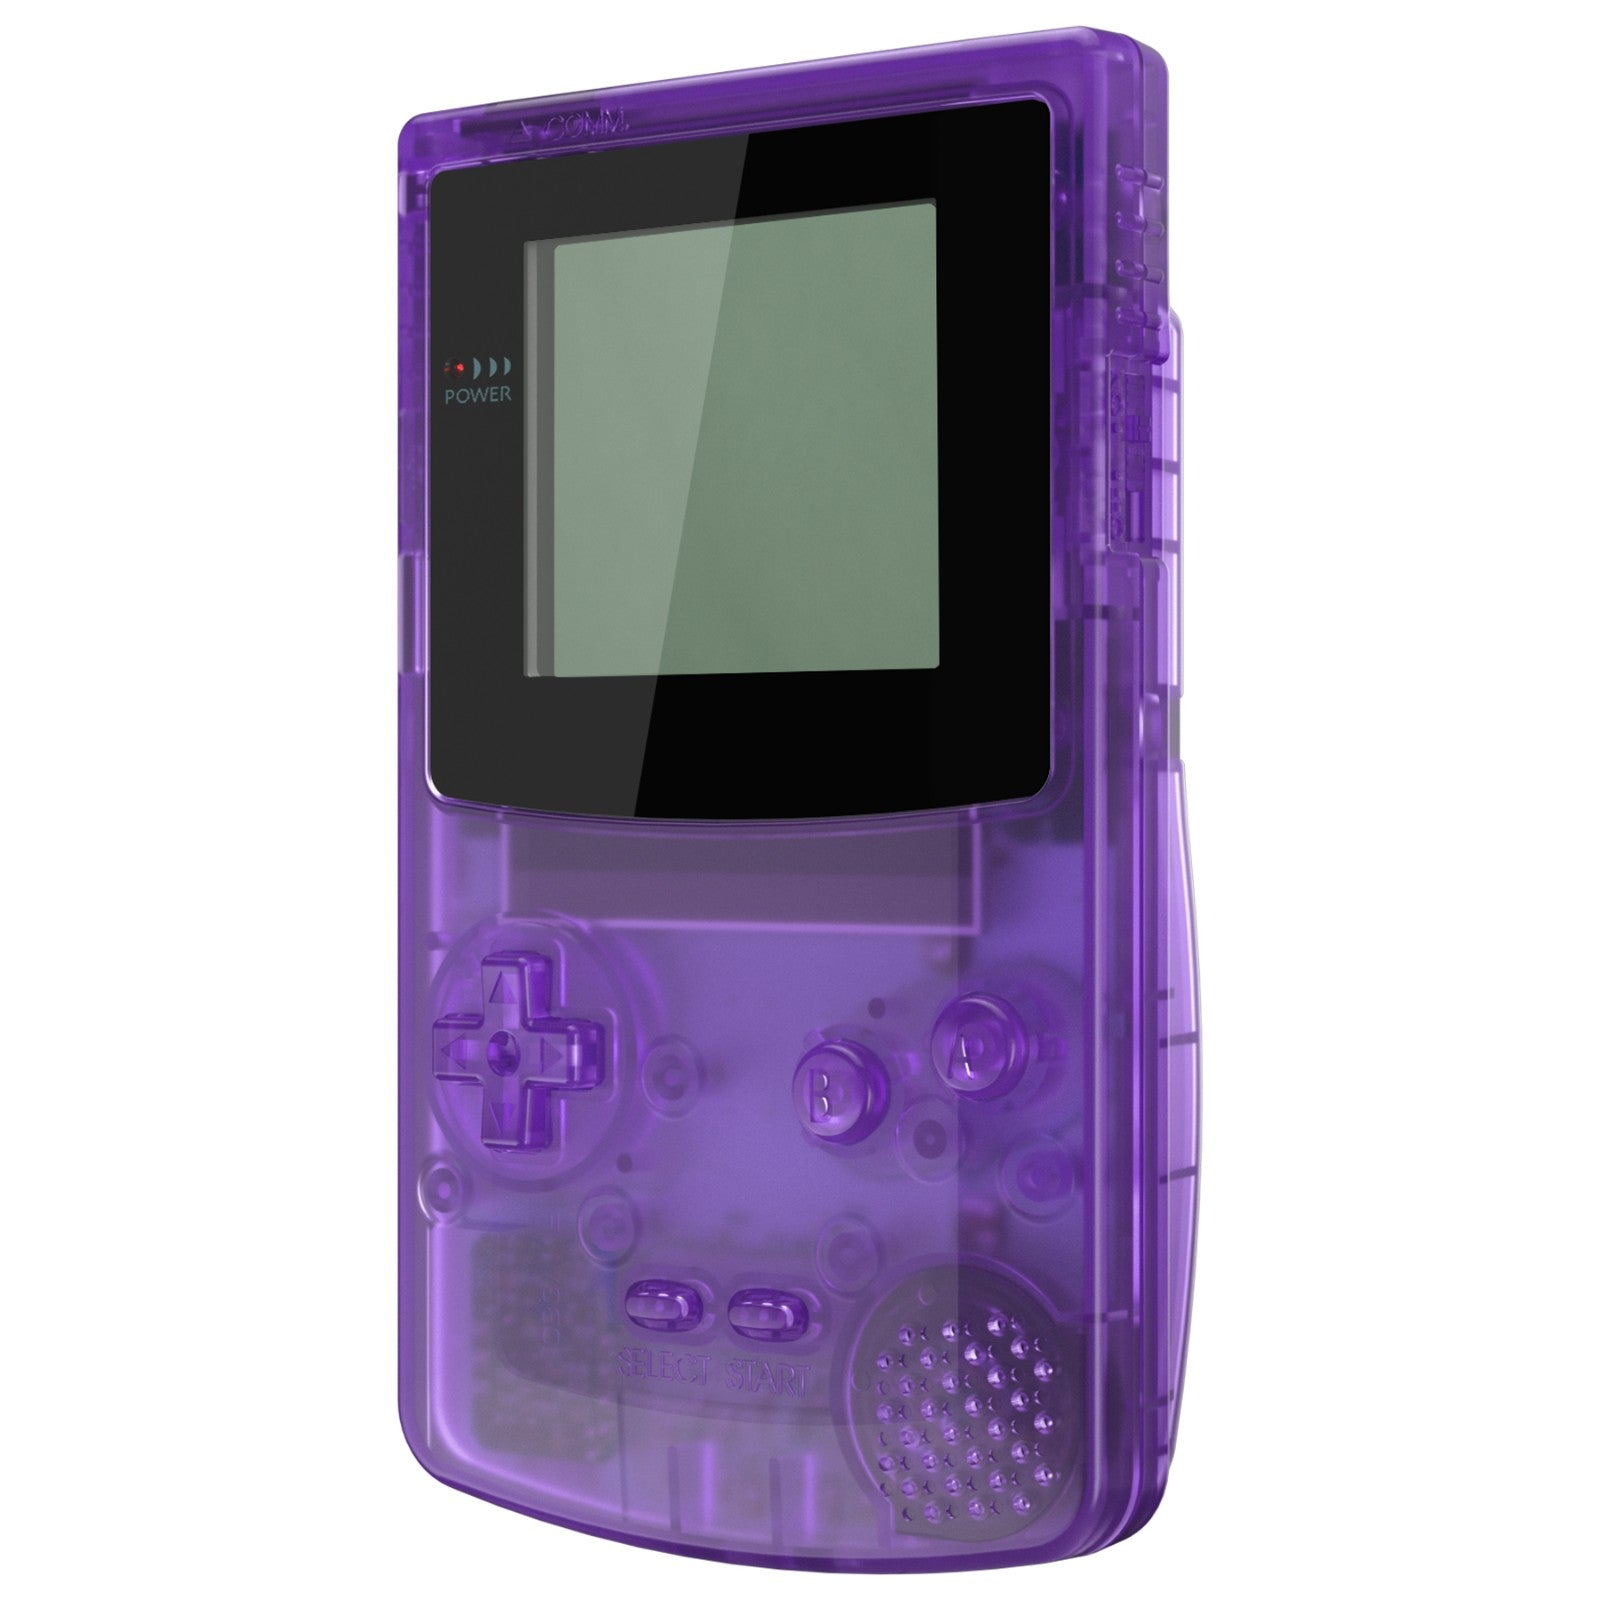 Nintendo Gameboy Game Boy Color Console - Atomic Purple, Used 